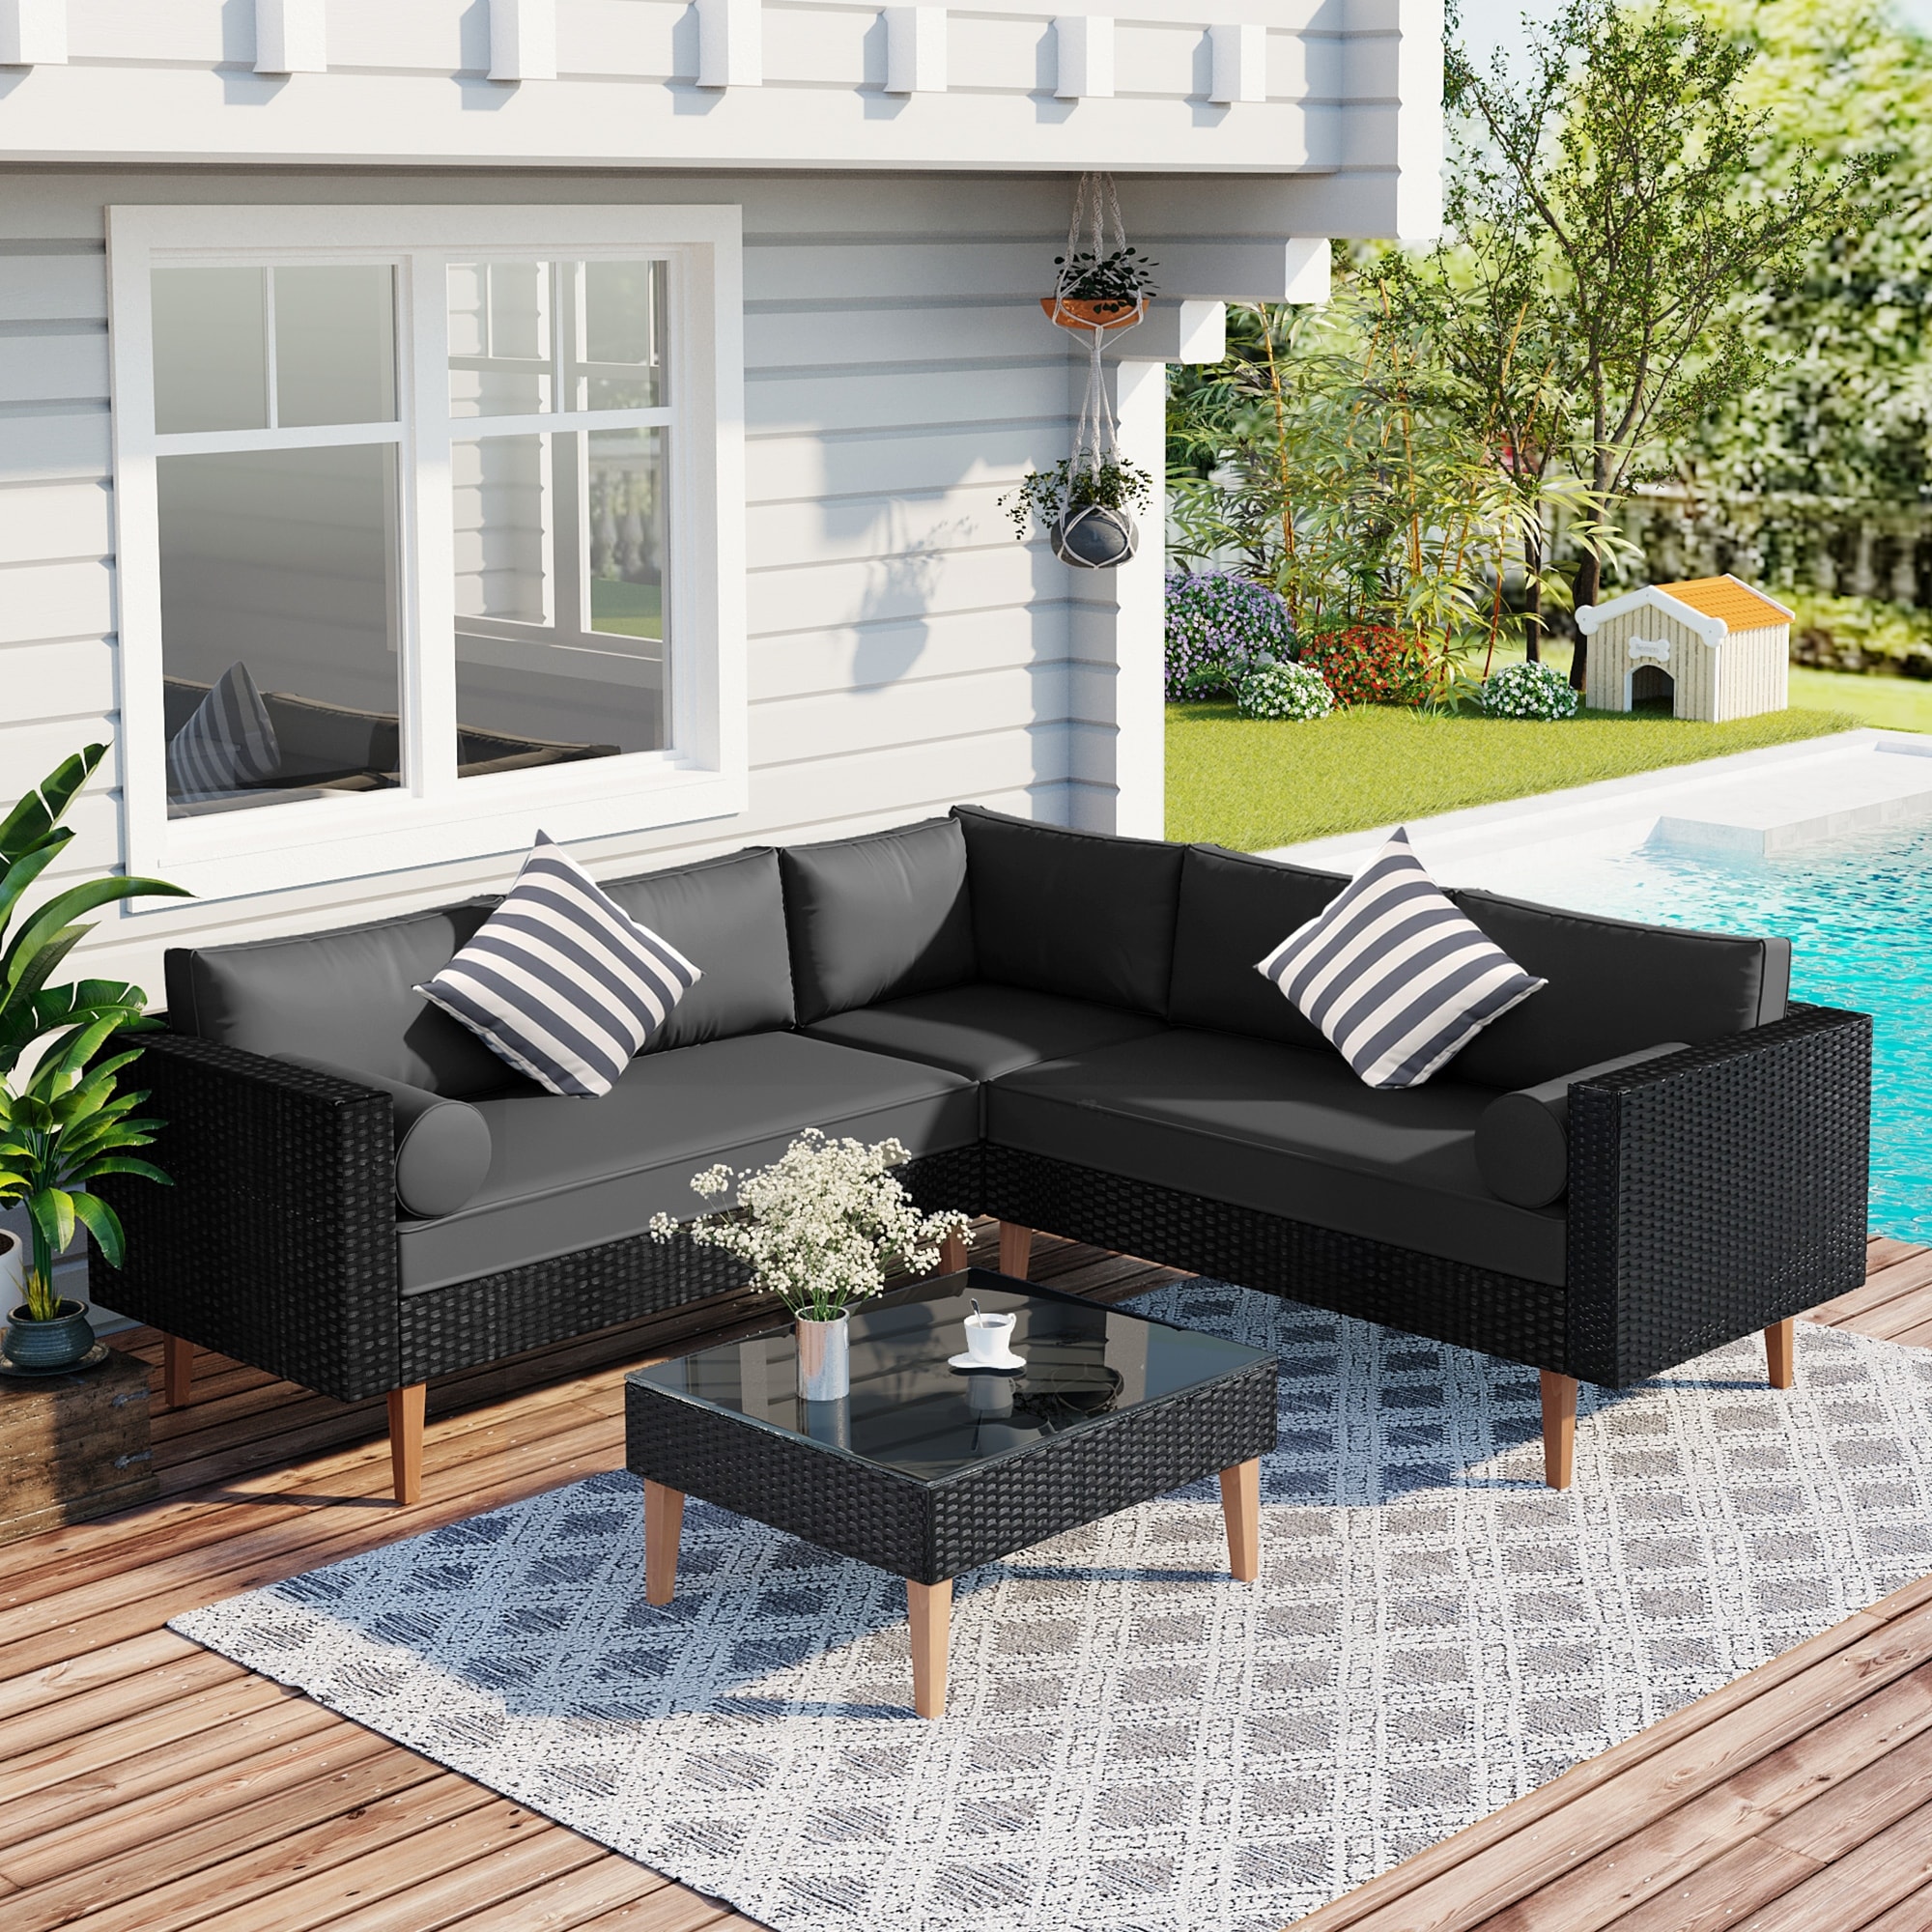 Outdoor Wicker Sofa Set  Durable Brown Rattan Patio Furniture With Colorful Pillows And Cushions